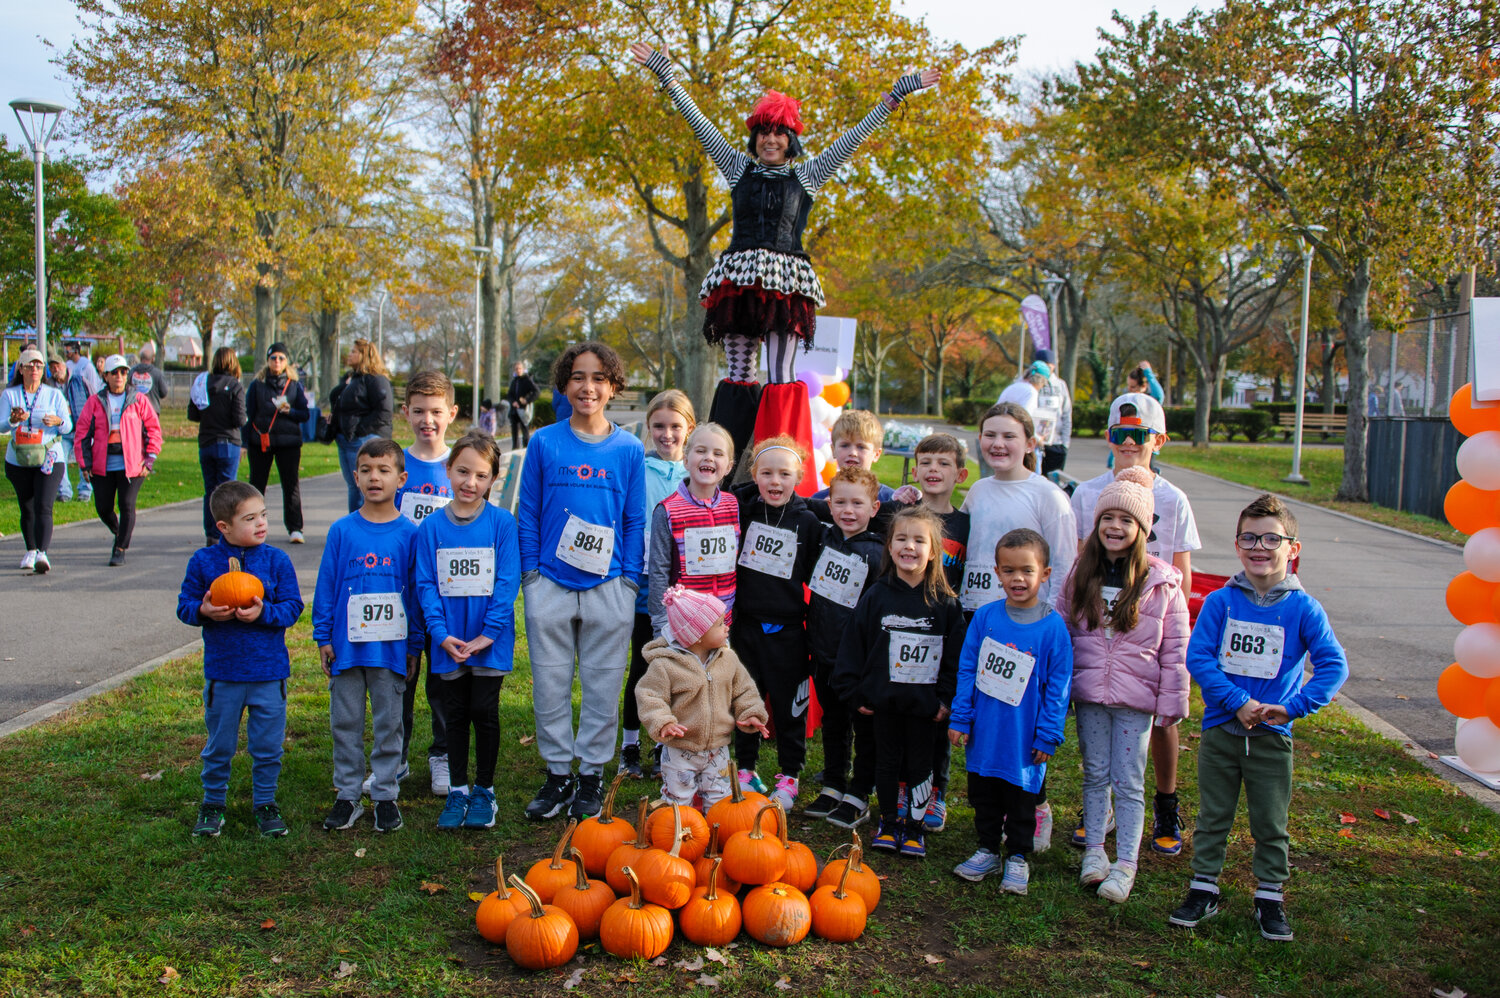 Children picking pumpkins after running in the Pumpkin Fun Run on Nov. 4 at Baldwin Harbor Park. The run occurred before the Marriane Volpe 5k.